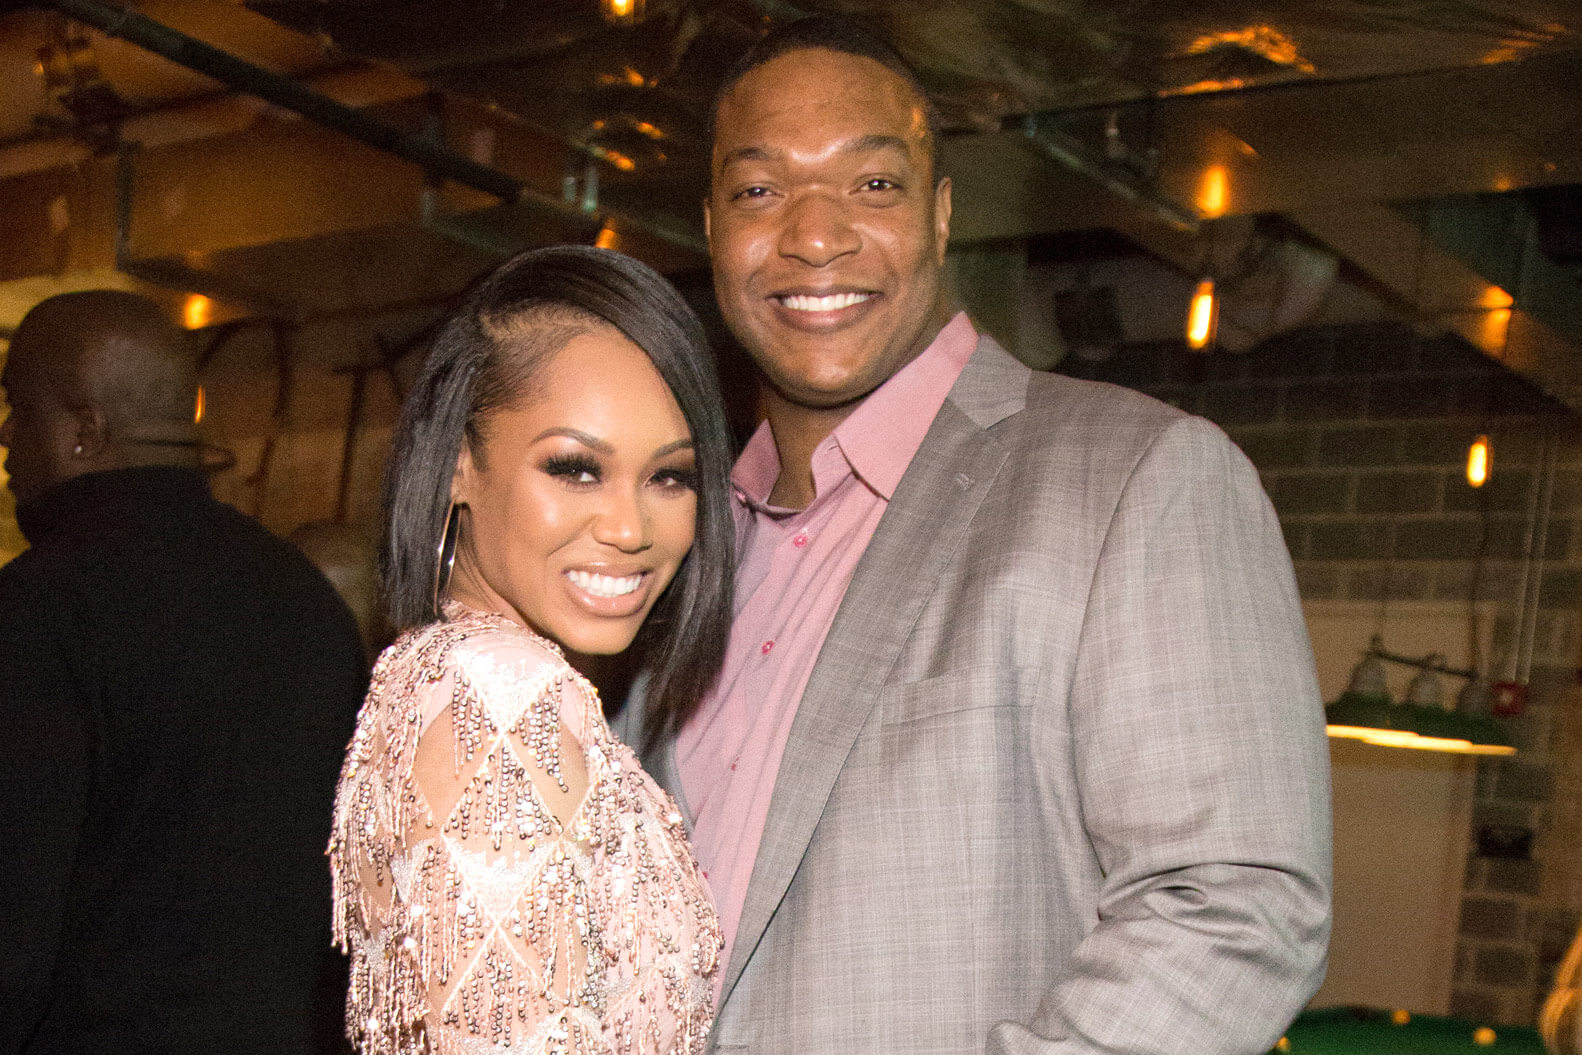 ‘RHOP’ Alum Monique Samuels And Husband Chris To Star In OWN’s ‘Love & Marriage: DMV’!